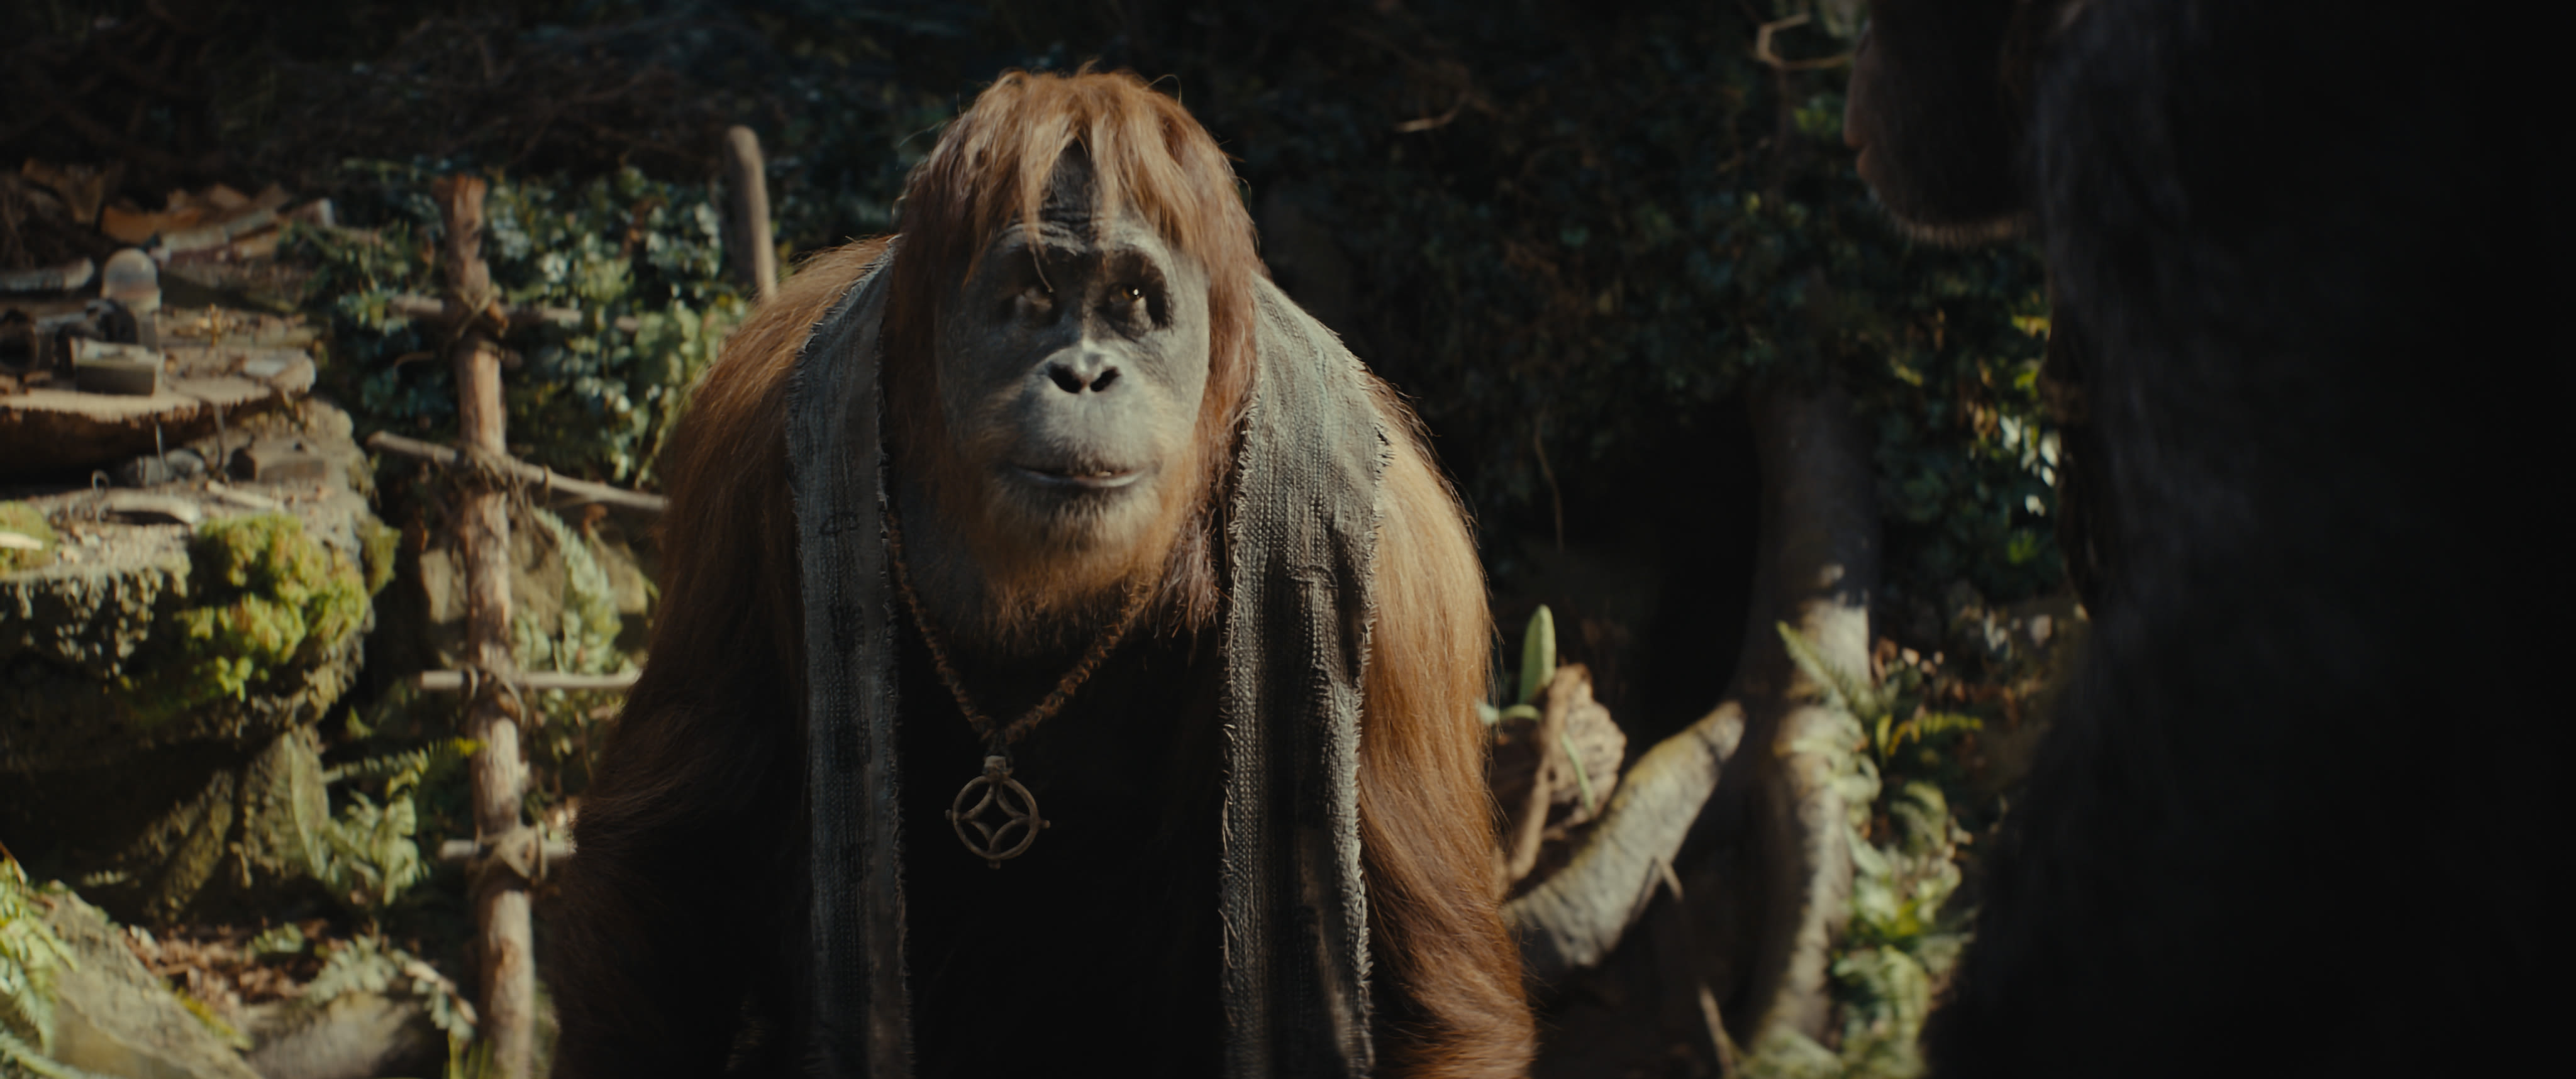 ‘Kingdom Of The Planet Of The Apes’ Solid Previews At $6.6M – Friday AM Box Office Update